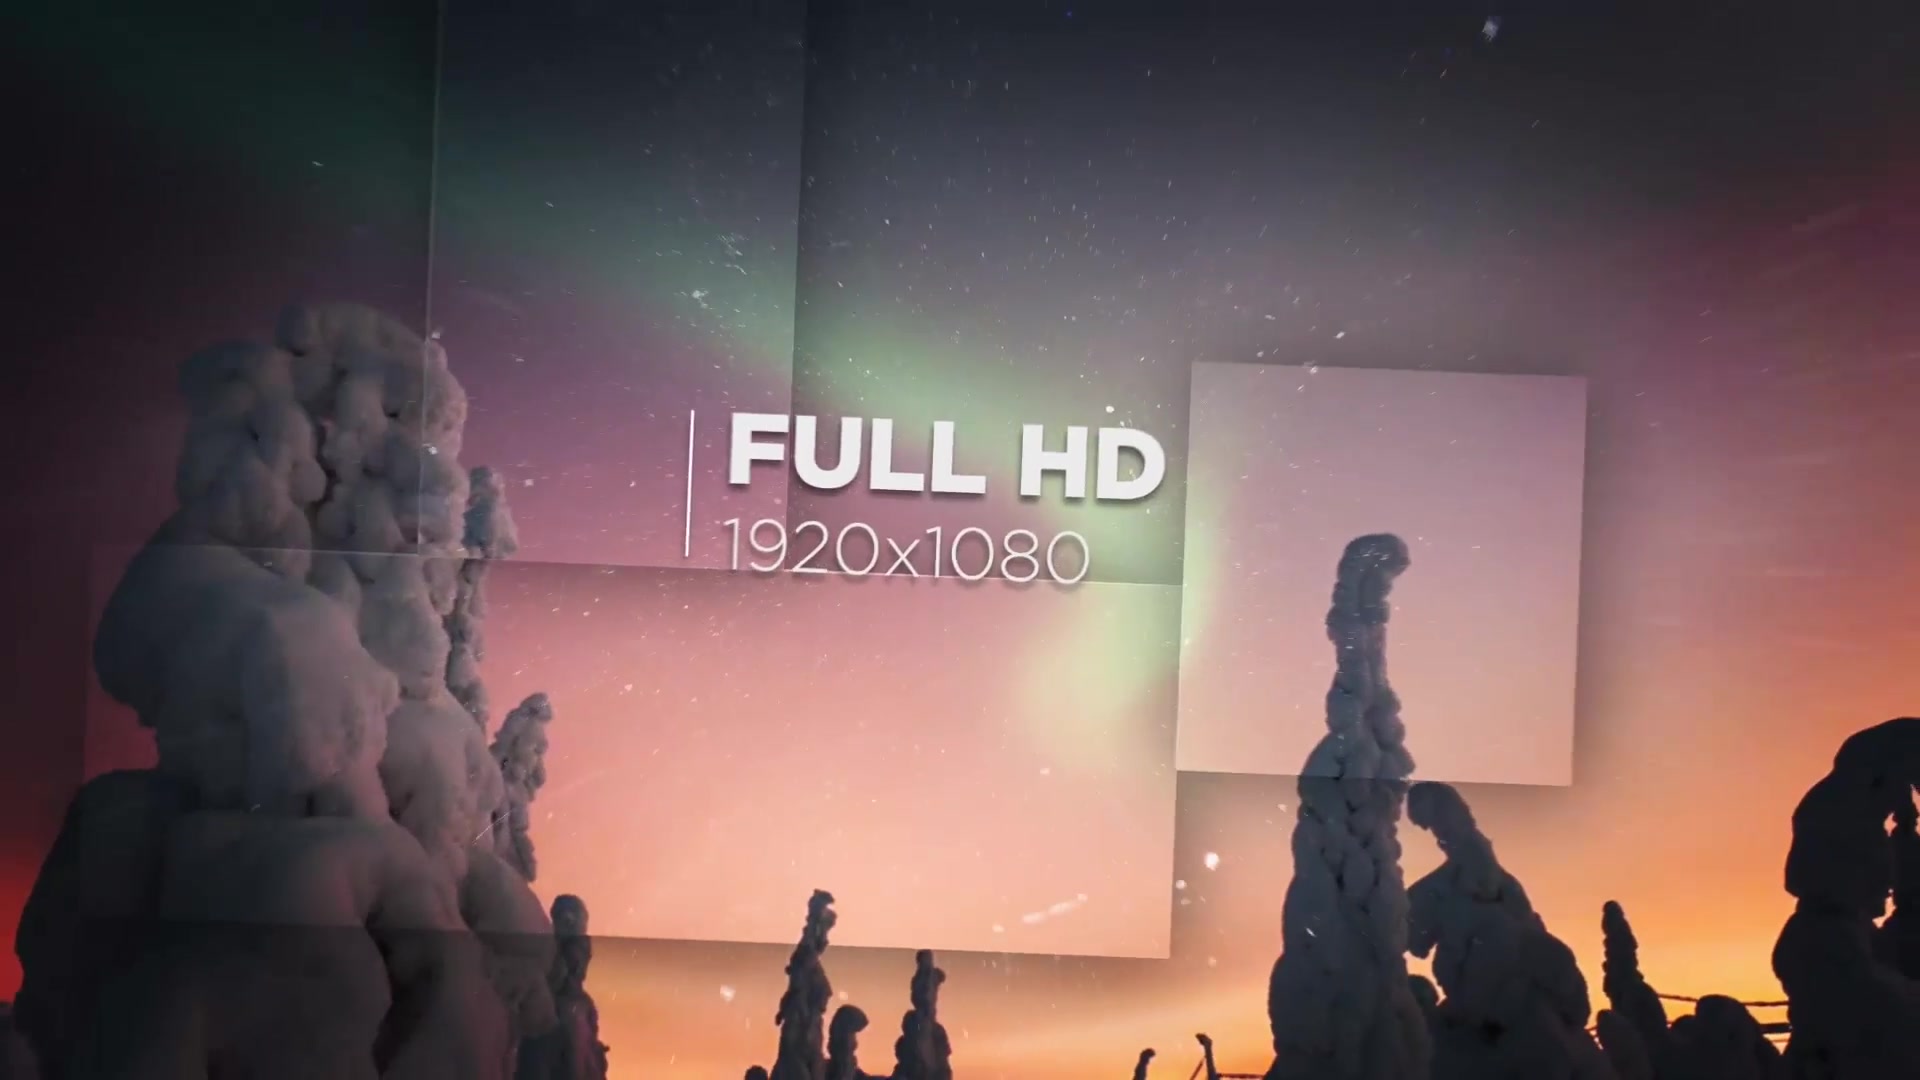 Float Slideshow - Download Videohive 13640134